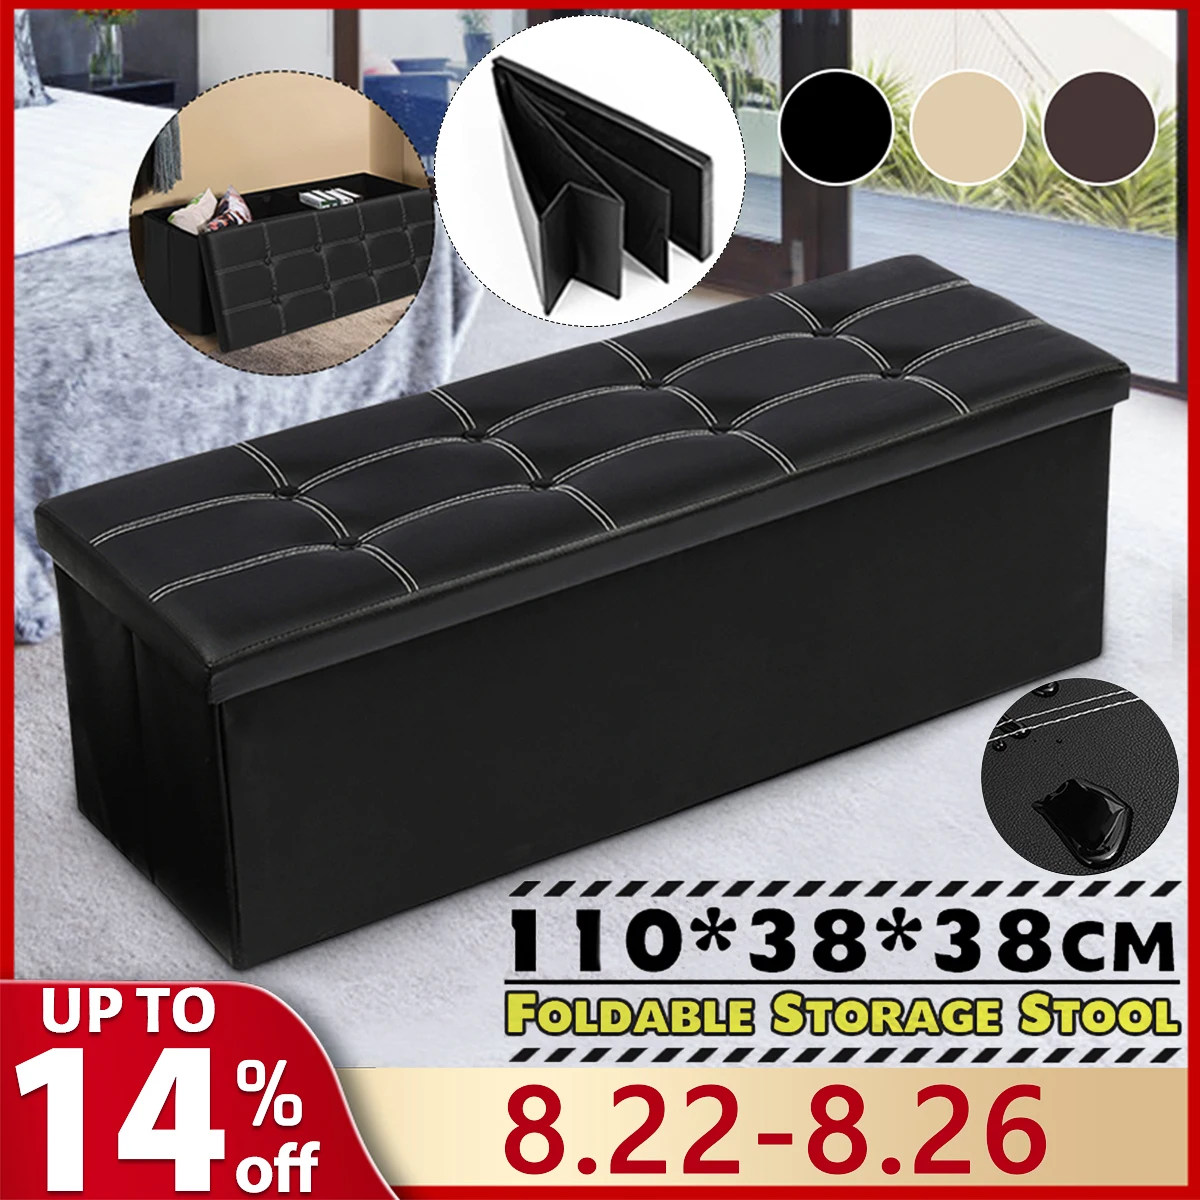 Large Storage Benches Foldable Stool with Storage Space Home Sofa Ottoman Seat Bench Chest Storage Box Living Room Furniture